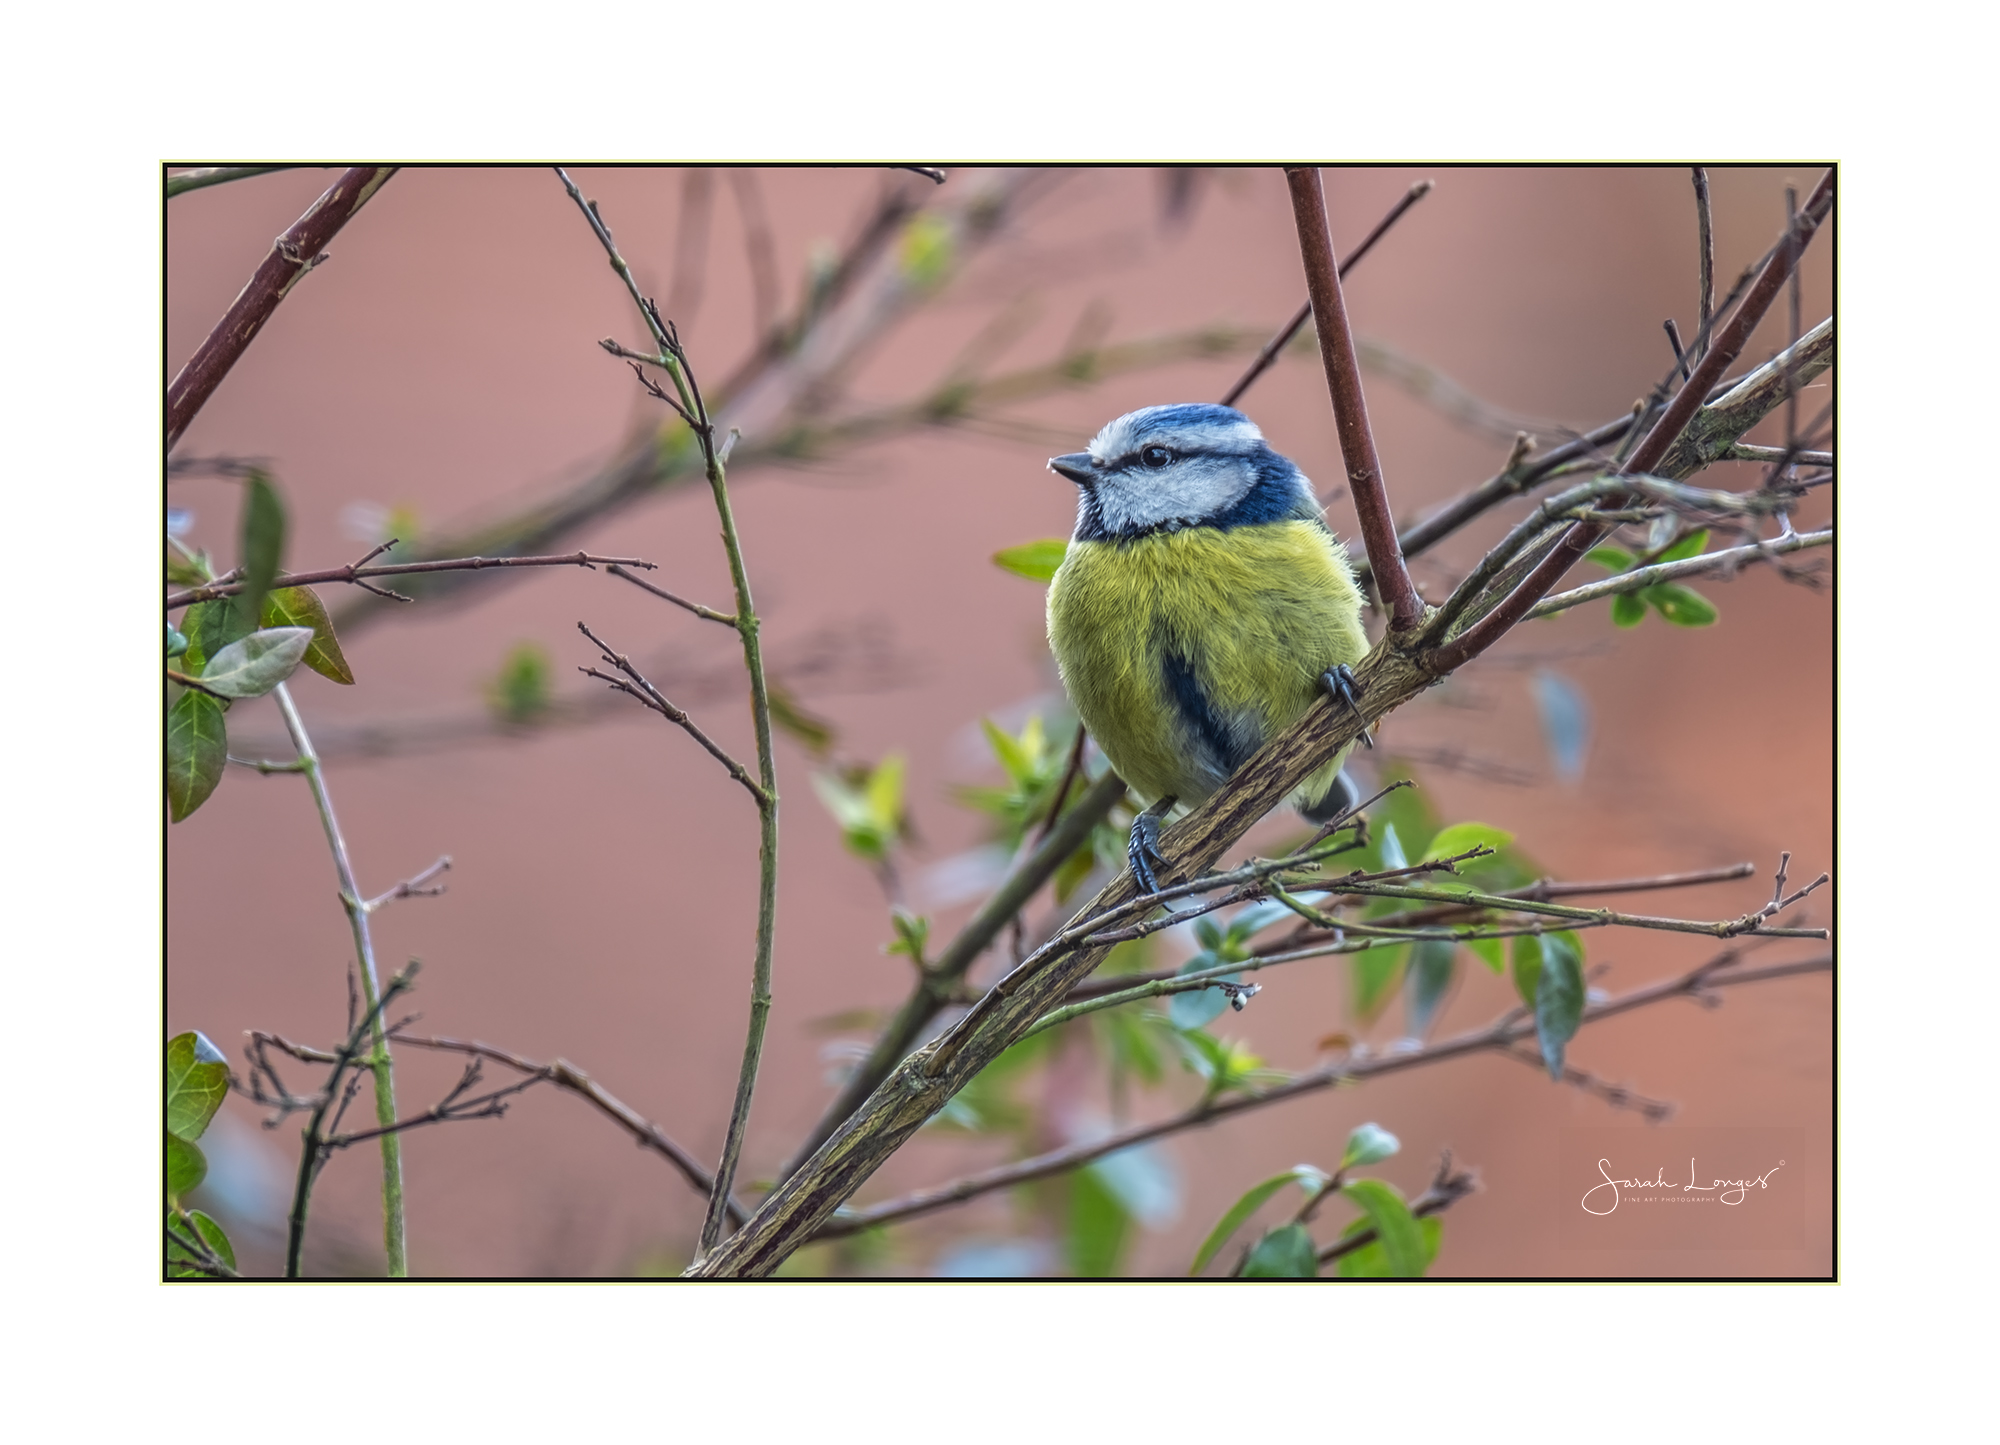 Blue Tit and budding Spring leaves